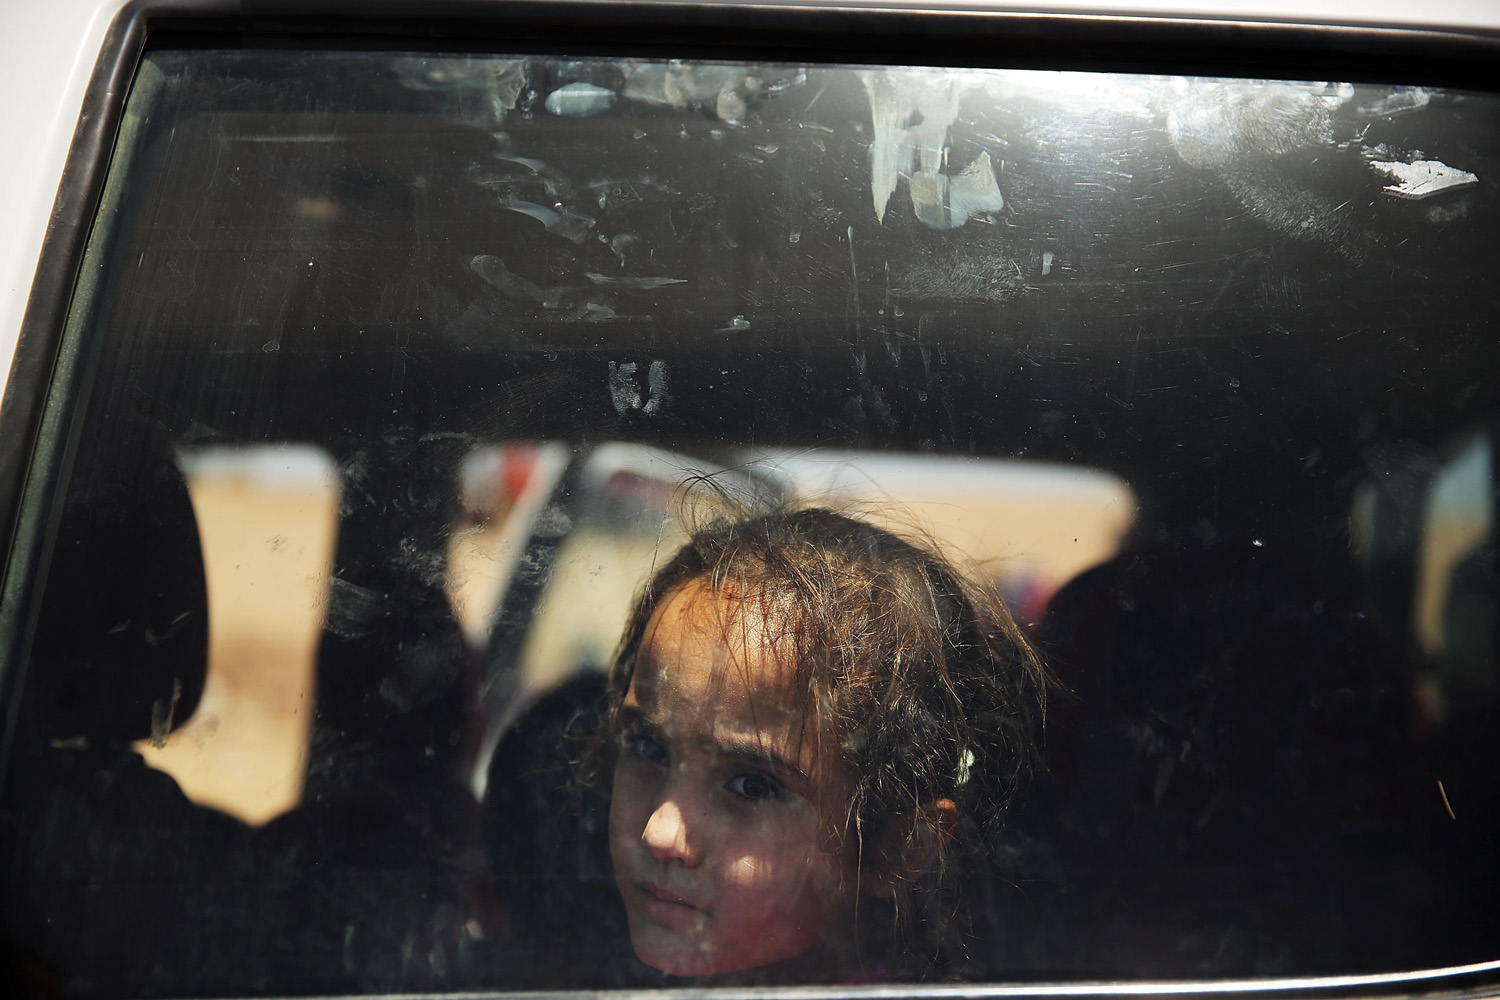 Jul. 1, 2014. An Iraqi girl look out of a window as over 1000 Iraqis who have fled fighting in and around the city of Mosul and Tal Afar wait at a Kurdish checkpoint in the hopes of entering a temporary displacement camp in Khazair, Iraq.